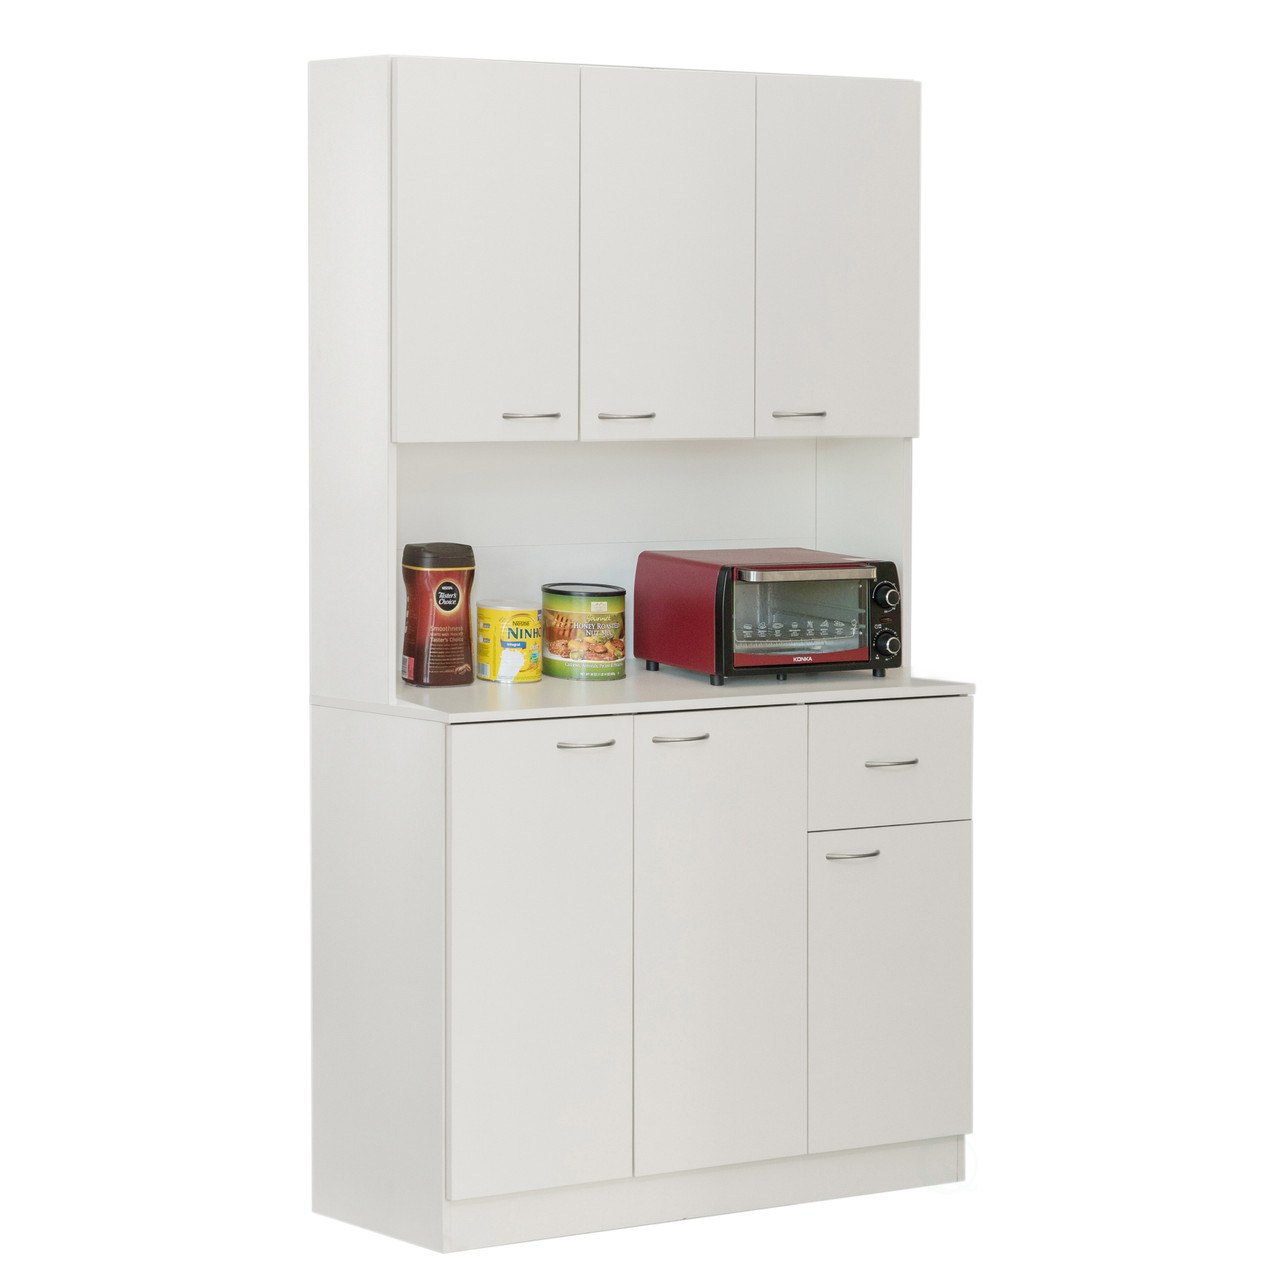 47 Kitchen Pantry Cabinets, Freestanding Kitchen Pantry Storage Cabinet  with Doors and Adjustable Shelves, Buffet Cupboards Storage Cabinet for  Home